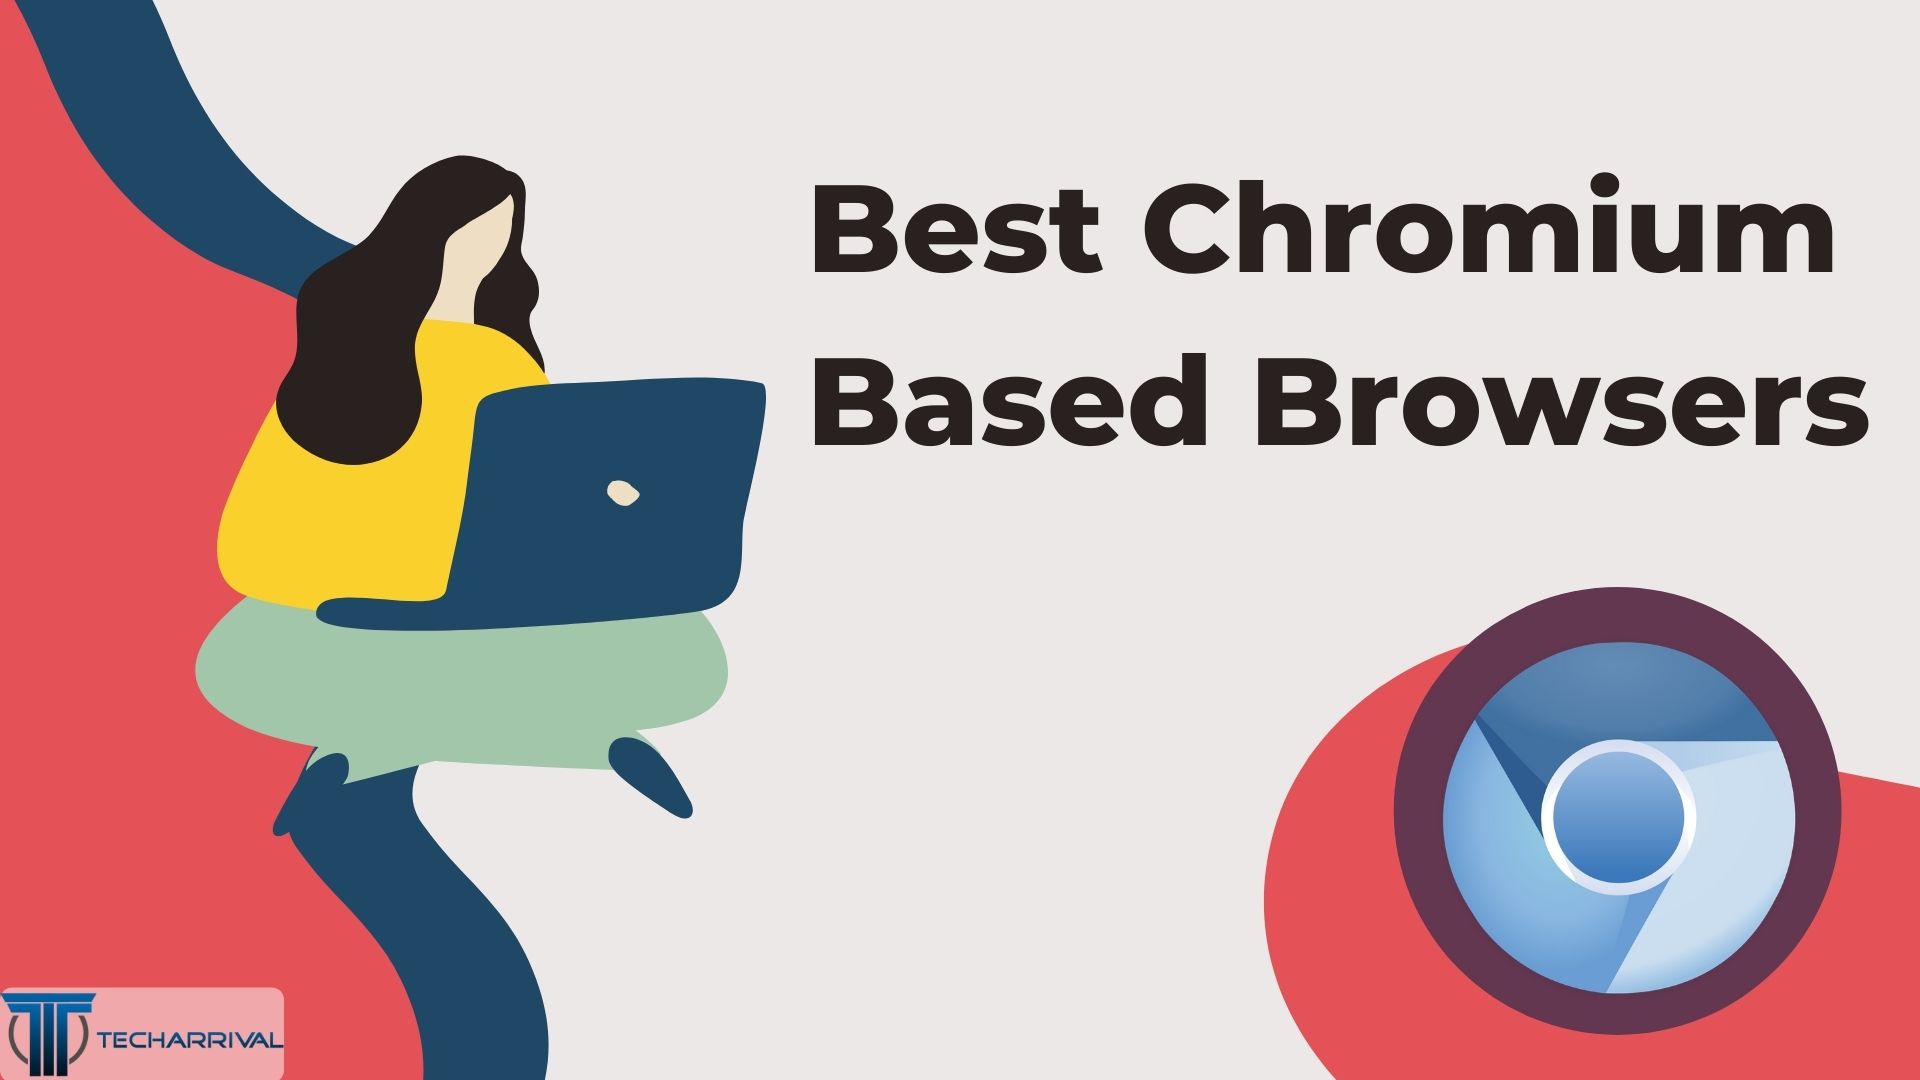 browsers built on chromium